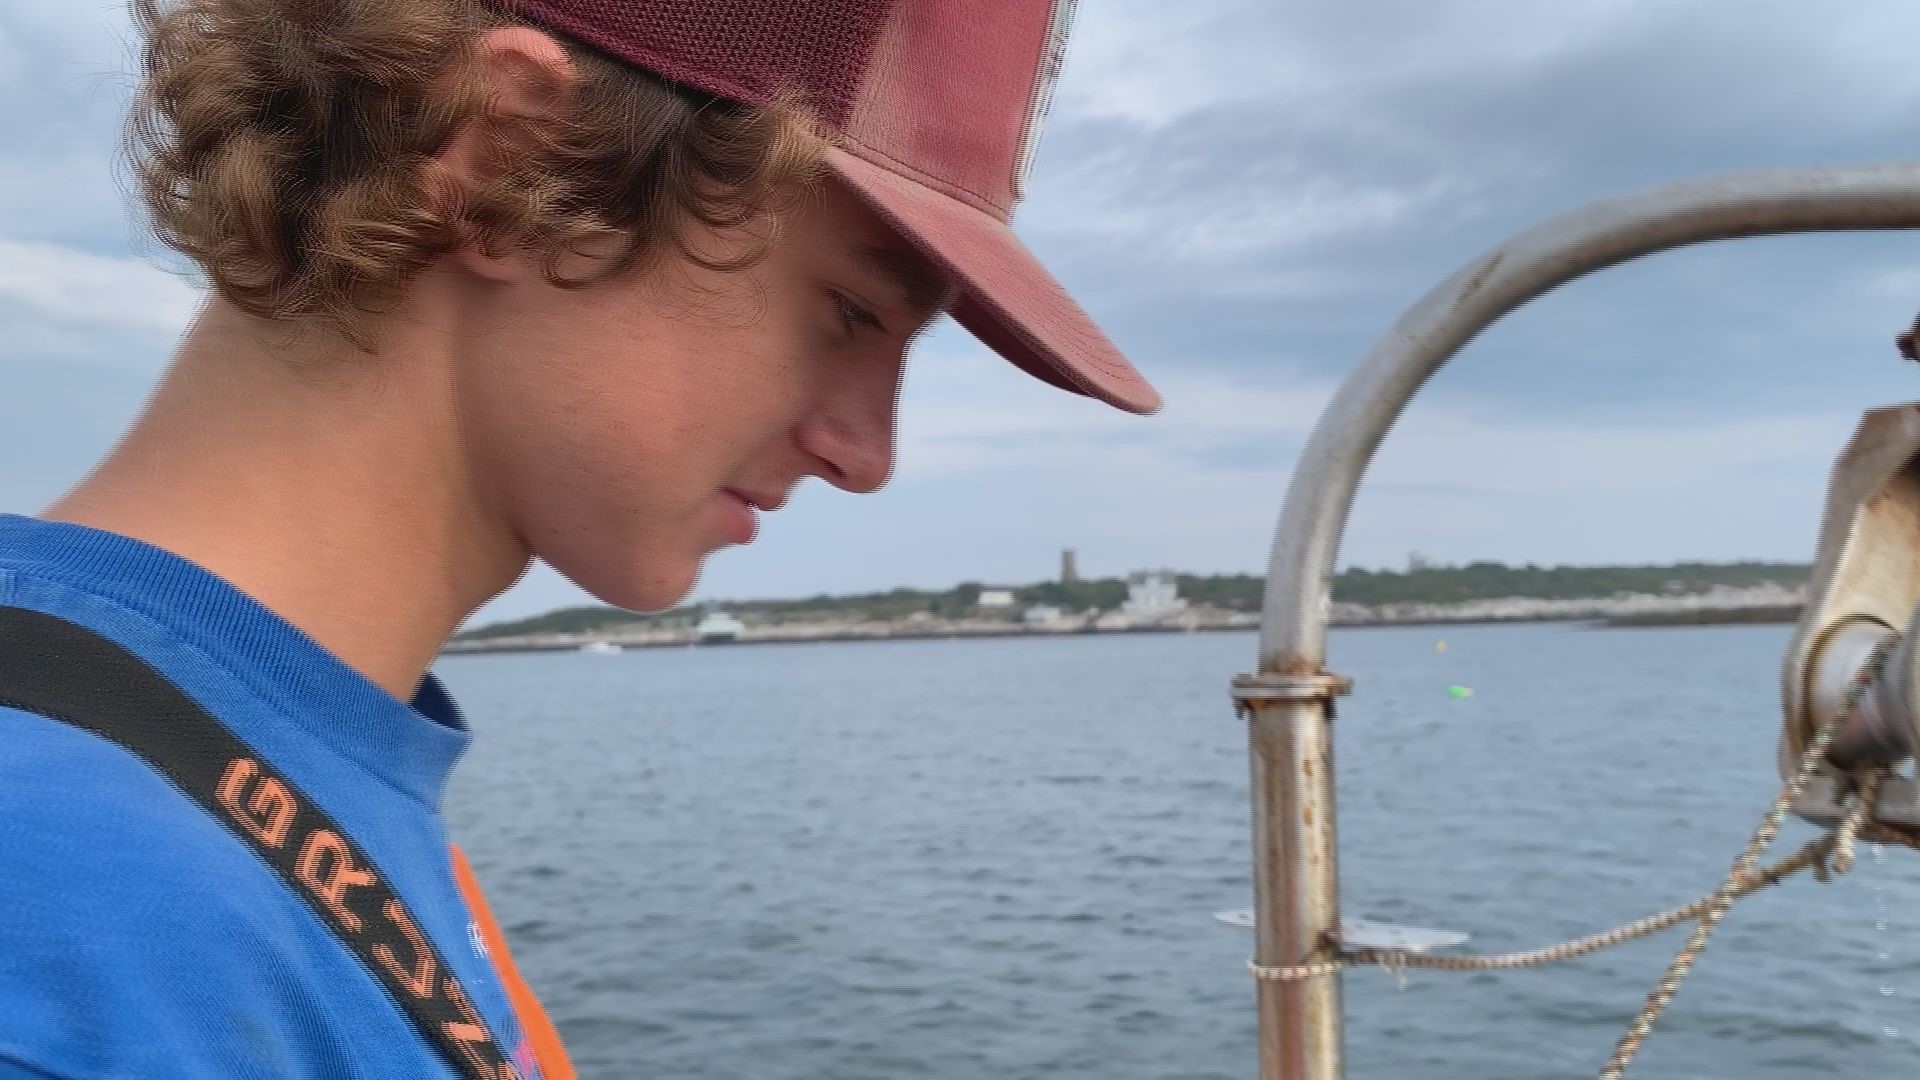 Zac Foye is only 15-years-old but he has completed the 1,000 hours of lobstering with a mentor necessary to ensure him a commercial lobster license when he turns 18.